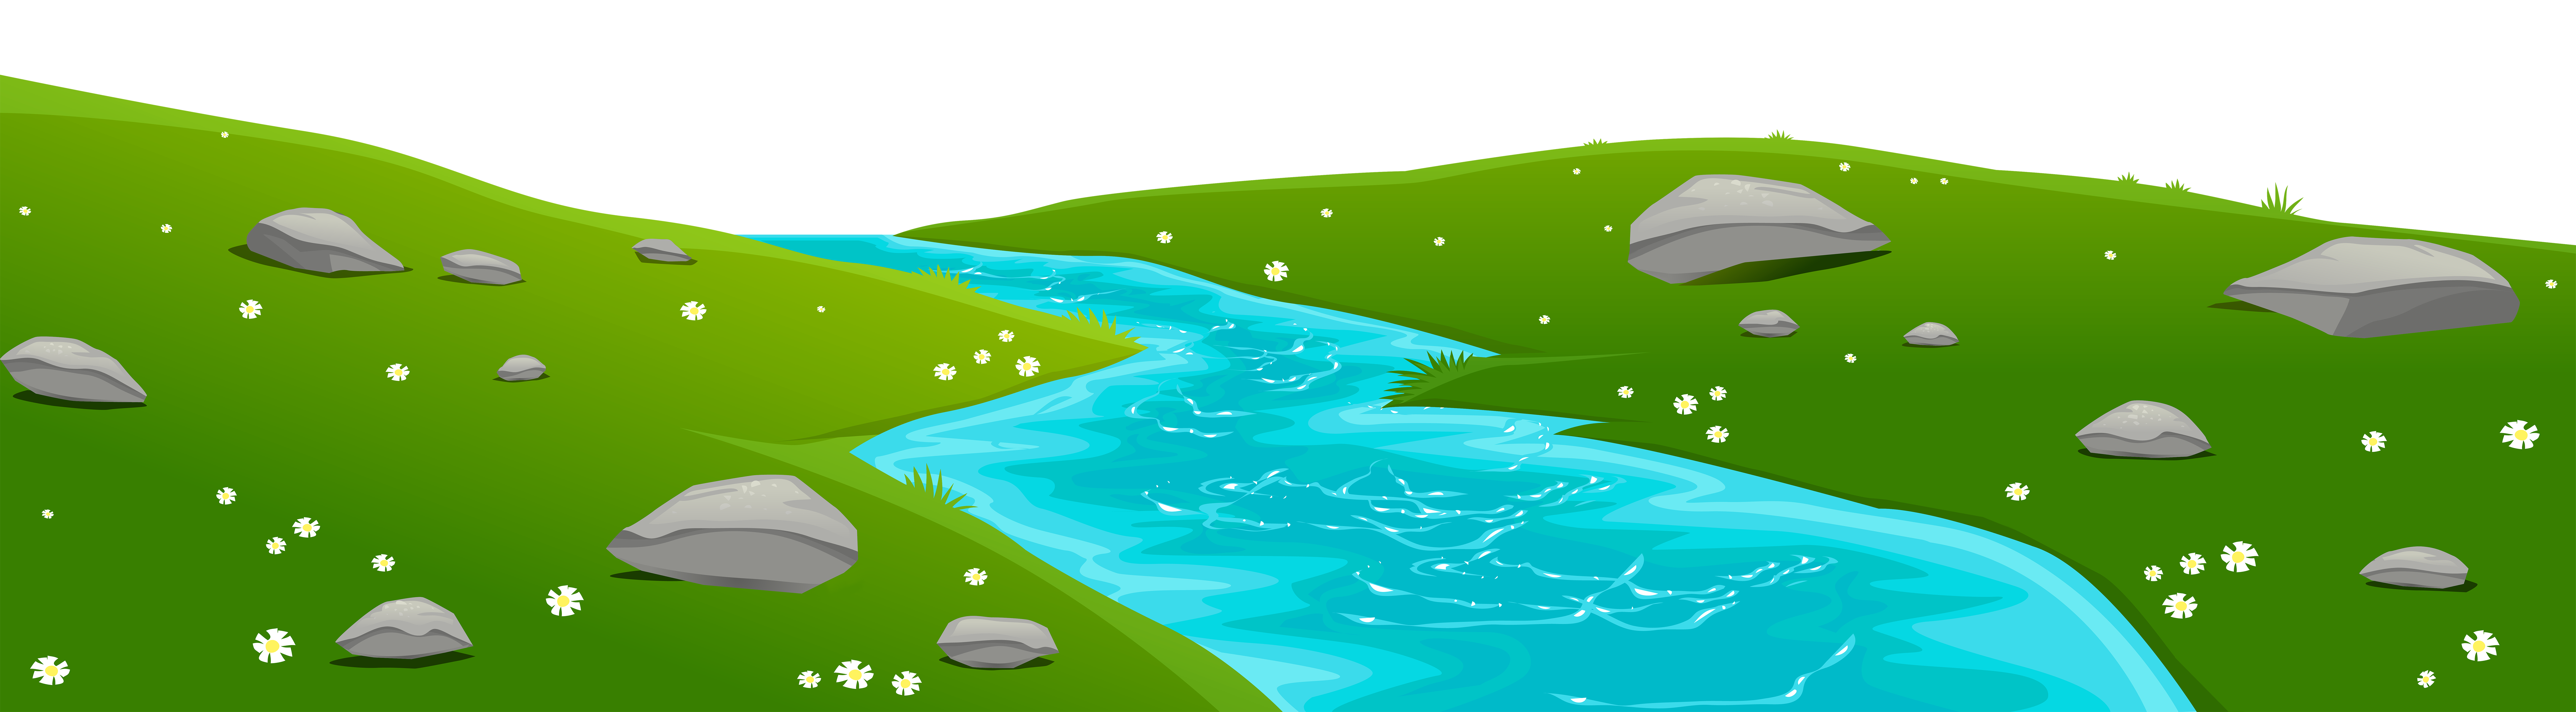 River Ground Cover Transparent PNG Clip Art Image.